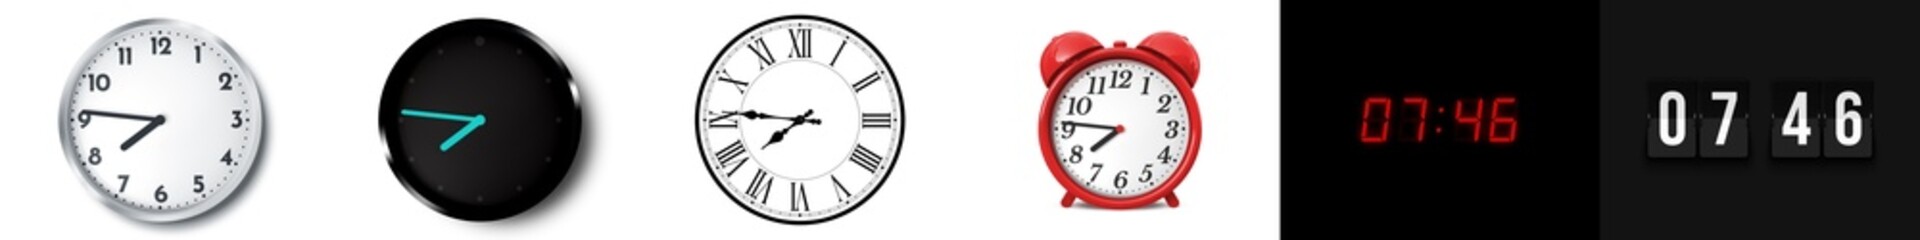 07:46 (AM and PM) or 19:46 time clock icons